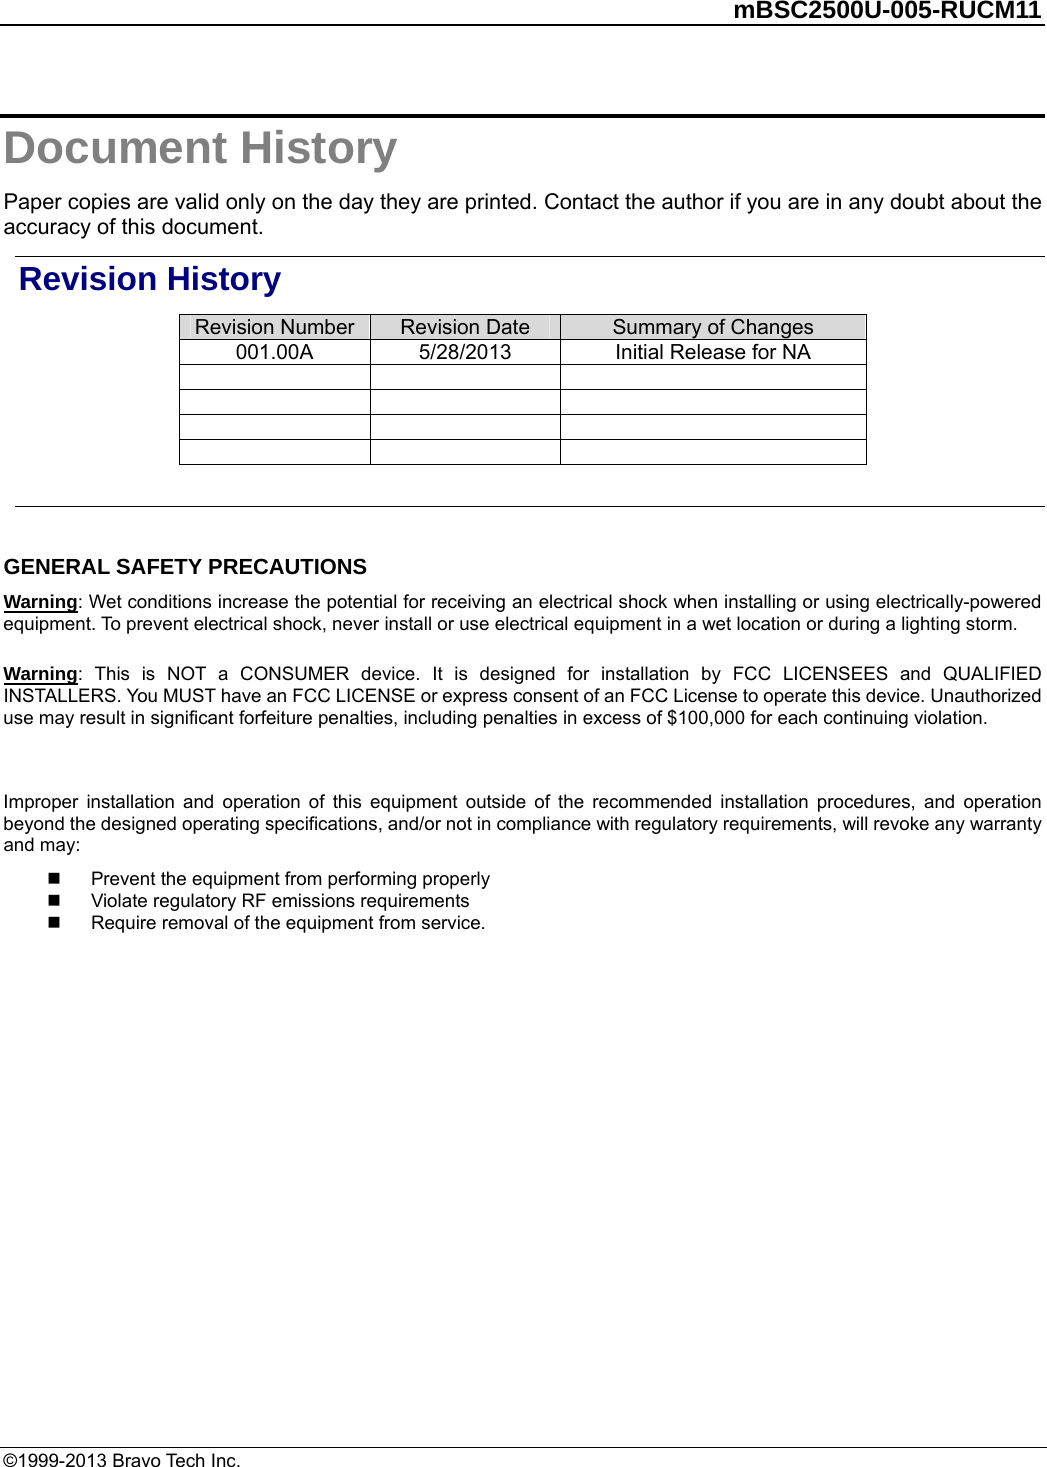         mBSC2500U-005-RUCM11   ©1999-2013 Bravo Tech Inc. Document History Paper copies are valid only on the day they are printed. Contact the author if you are in any doubt about the accuracy of this document. Revision History Revision Number  Revision Date  Summary of Changes 001.00A  5/28/2013  Initial Release for NA                     GENERAL SAFETY PRECAUTIONS Warning: Wet conditions increase the potential for receiving an electrical shock when installing or using electrically-powered equipment. To prevent electrical shock, never install or use electrical equipment in a wet location or during a lighting storm. Warning: This is NOT a CONSUMER device. It is designed for installation by FCC LICENSEES and QUALIFIED INSTALLERS. You MUST have an FCC LICENSE or express consent of an FCC License to operate this device. Unauthorized use may result in significant forfeiture penalties, including penalties in excess of $100,000 for each continuing violation.  Improper installation and operation of this equipment outside of the recommended installation procedures, and operation beyond the designed operating specifications, and/or not in compliance with regulatory requirements, will revoke any warranty and may:   Prevent the equipment from performing properly   Violate regulatory RF emissions requirements   Require removal of the equipment from service.  